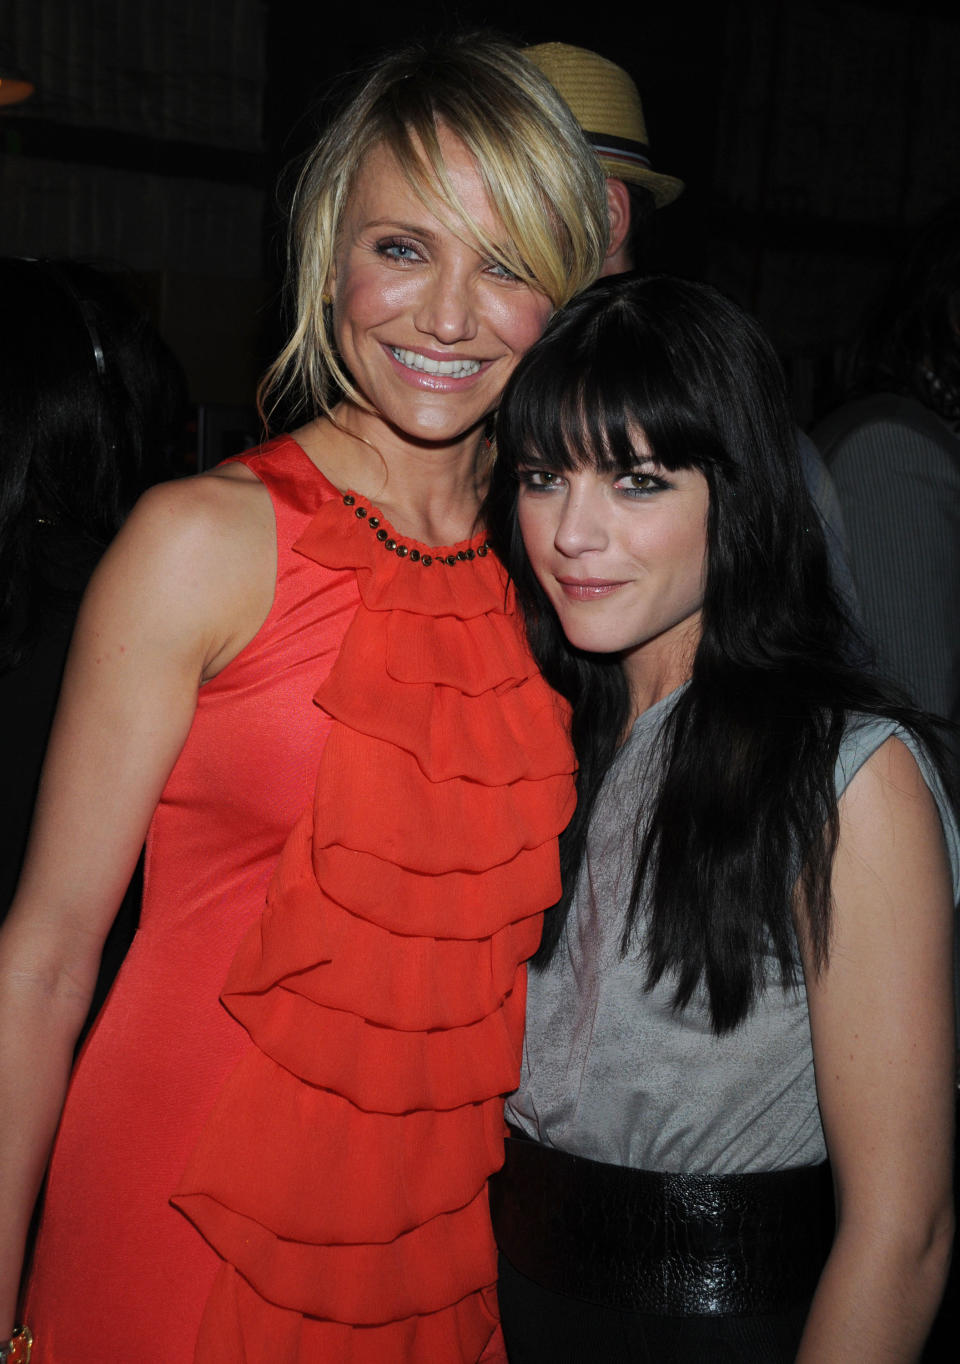 Cameron Diaz reportedly confided in Selma Blair that she has retired from showbiz. Here are the women, and former co-stars, in 2008. (Photo: Getty Images)